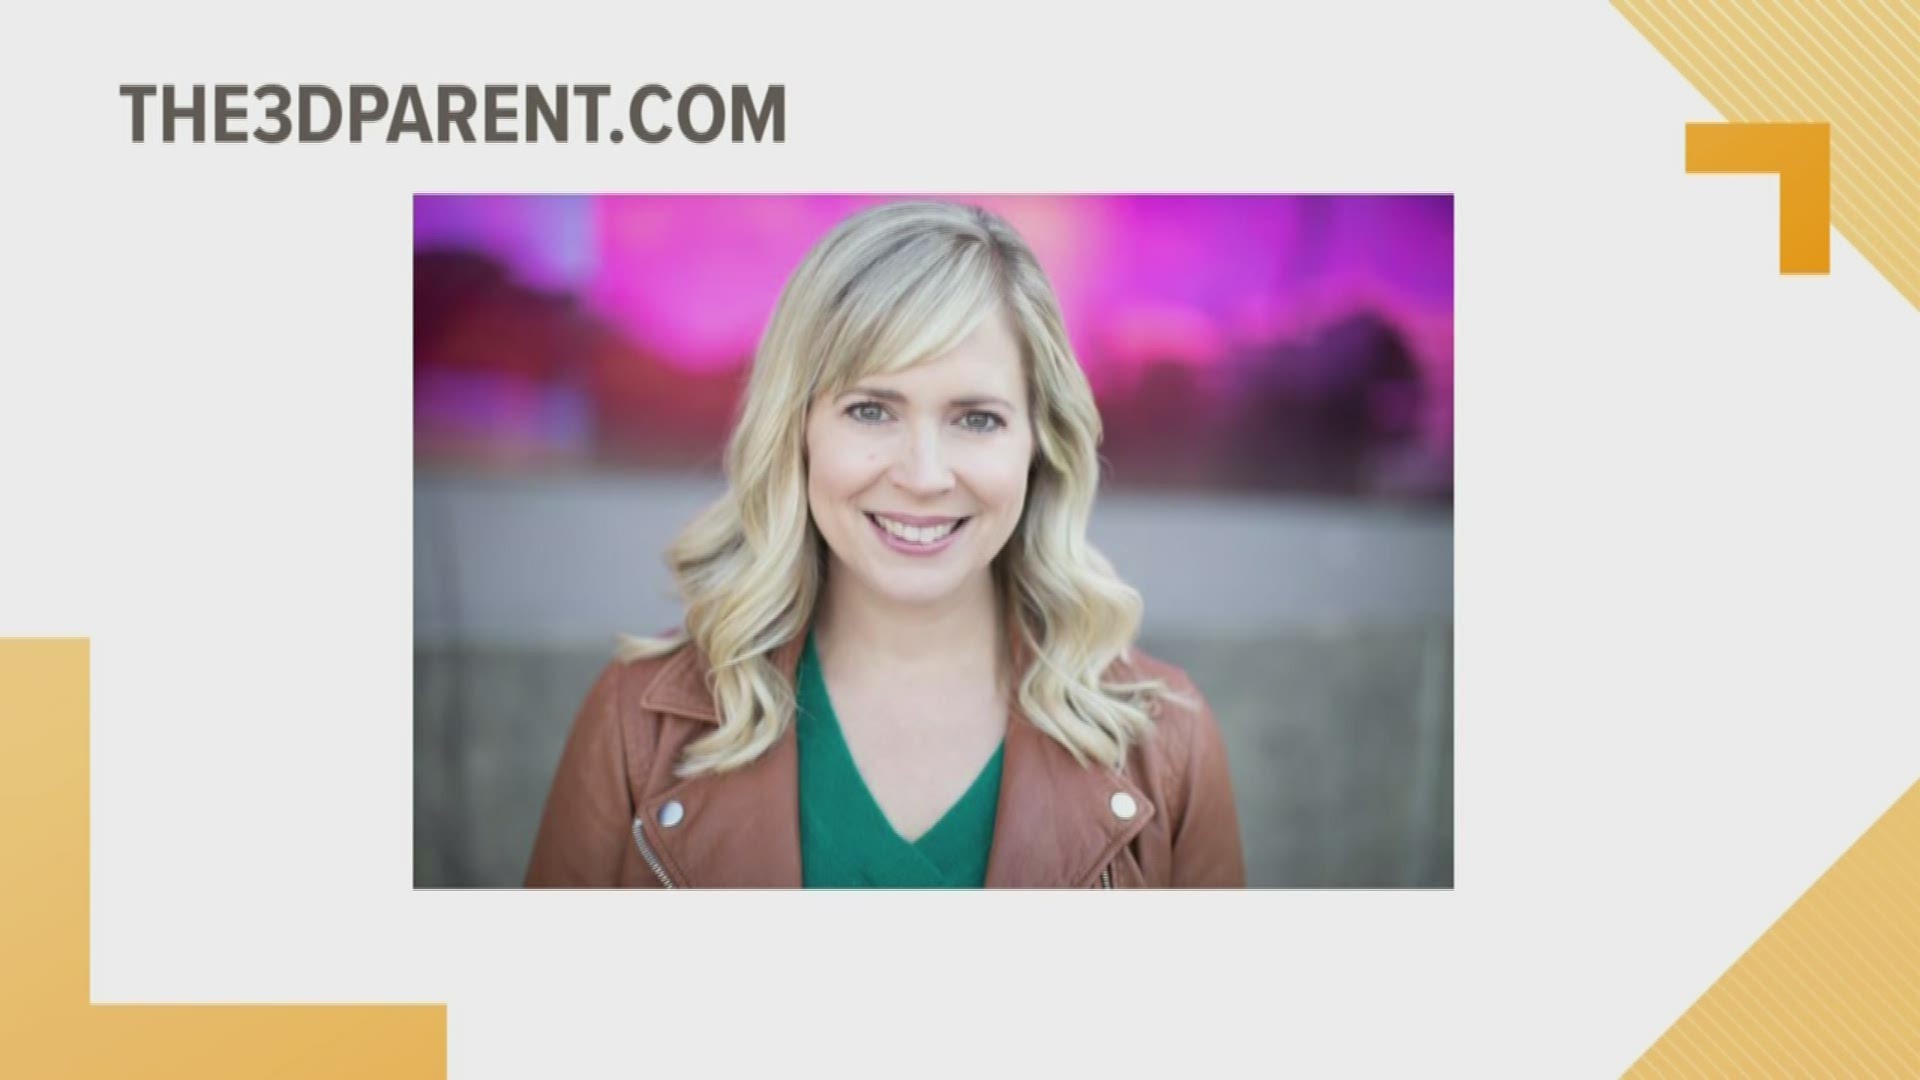 Beaven Walters, the founder of 3D Parent, shares tips for parents when it's time for their child's teacher conferences. KING 5's Amity Addrisi helps decode parenting